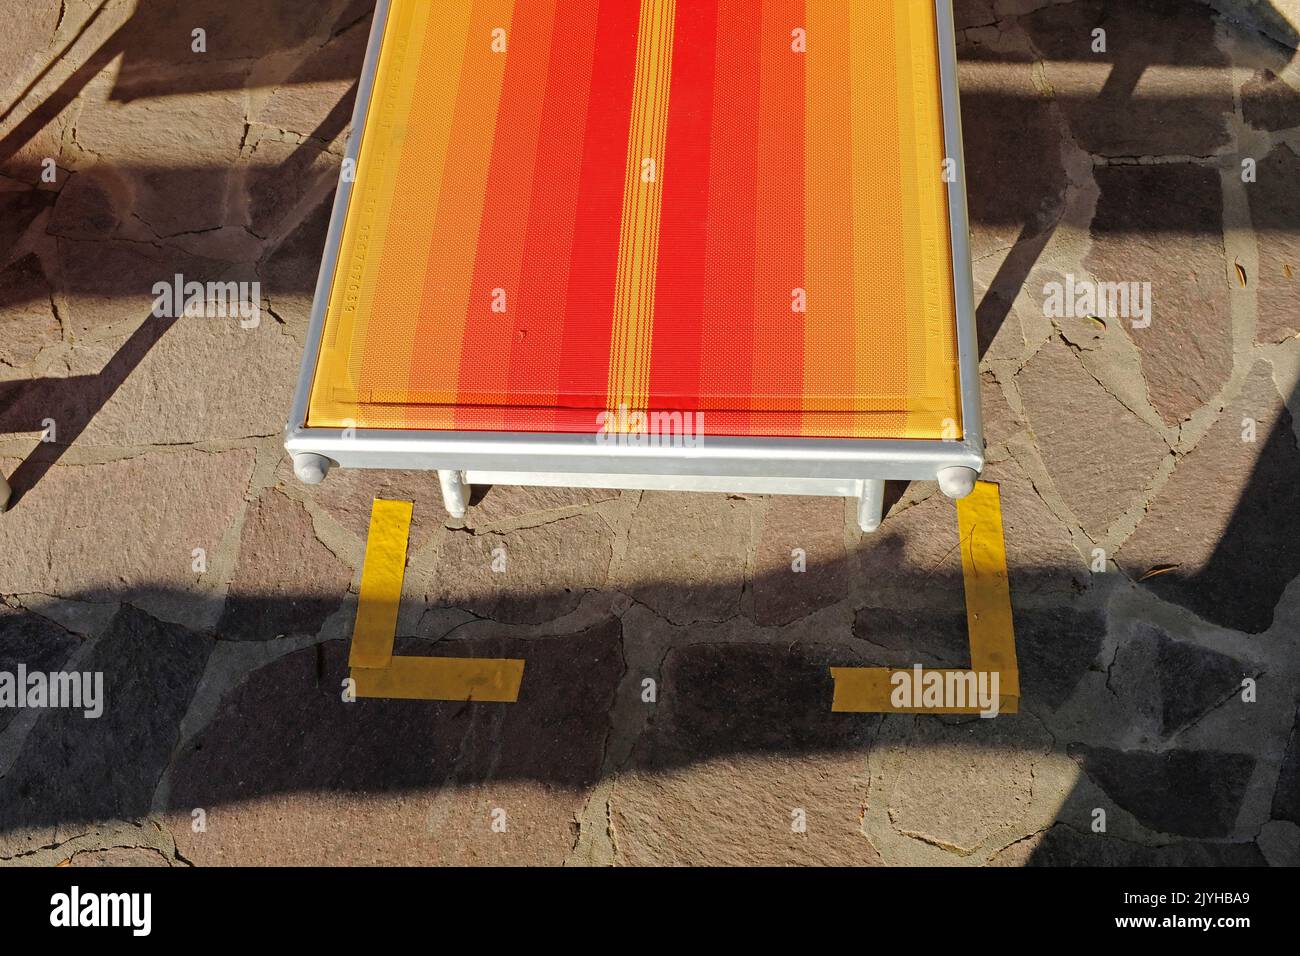 A sun lounger with Covid markings by a swimming pool. Stock Photo